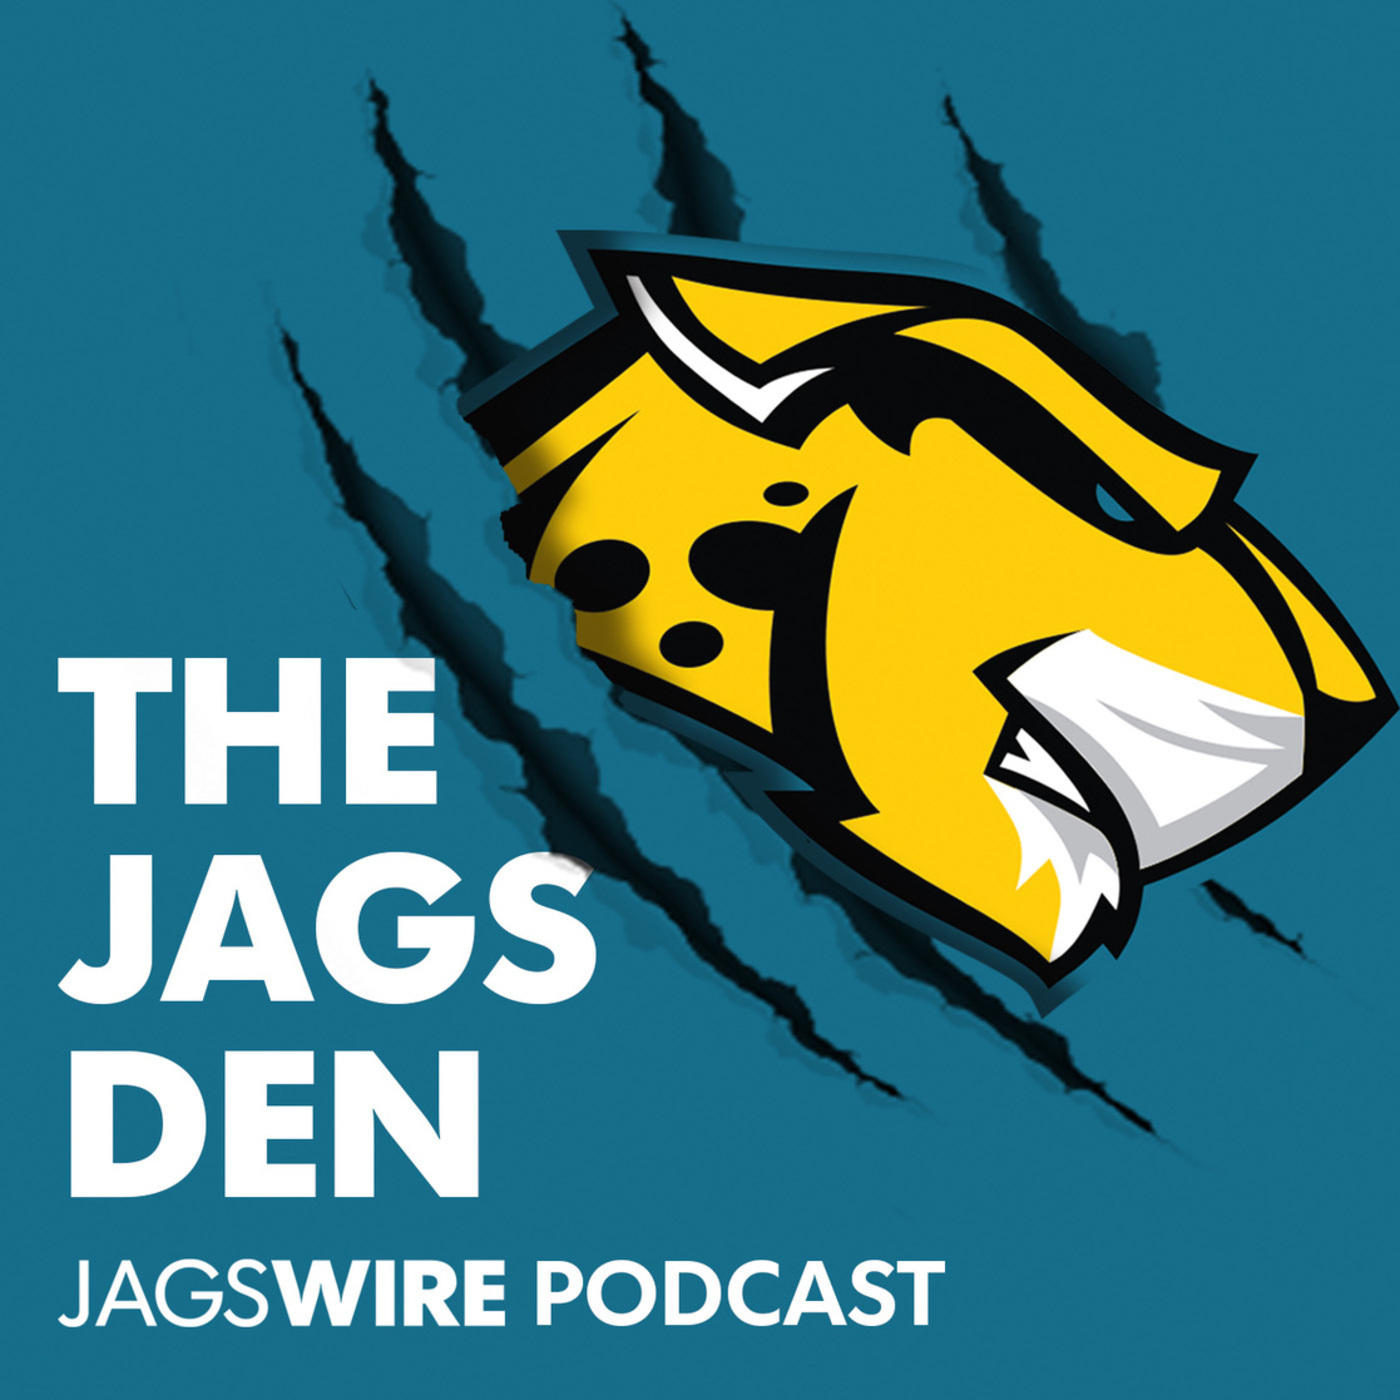 Jags Den Podcast Ep. 47.5: Marqise Lee removed from PUP list, Jags getting healthier, Richardson impresses Marrone